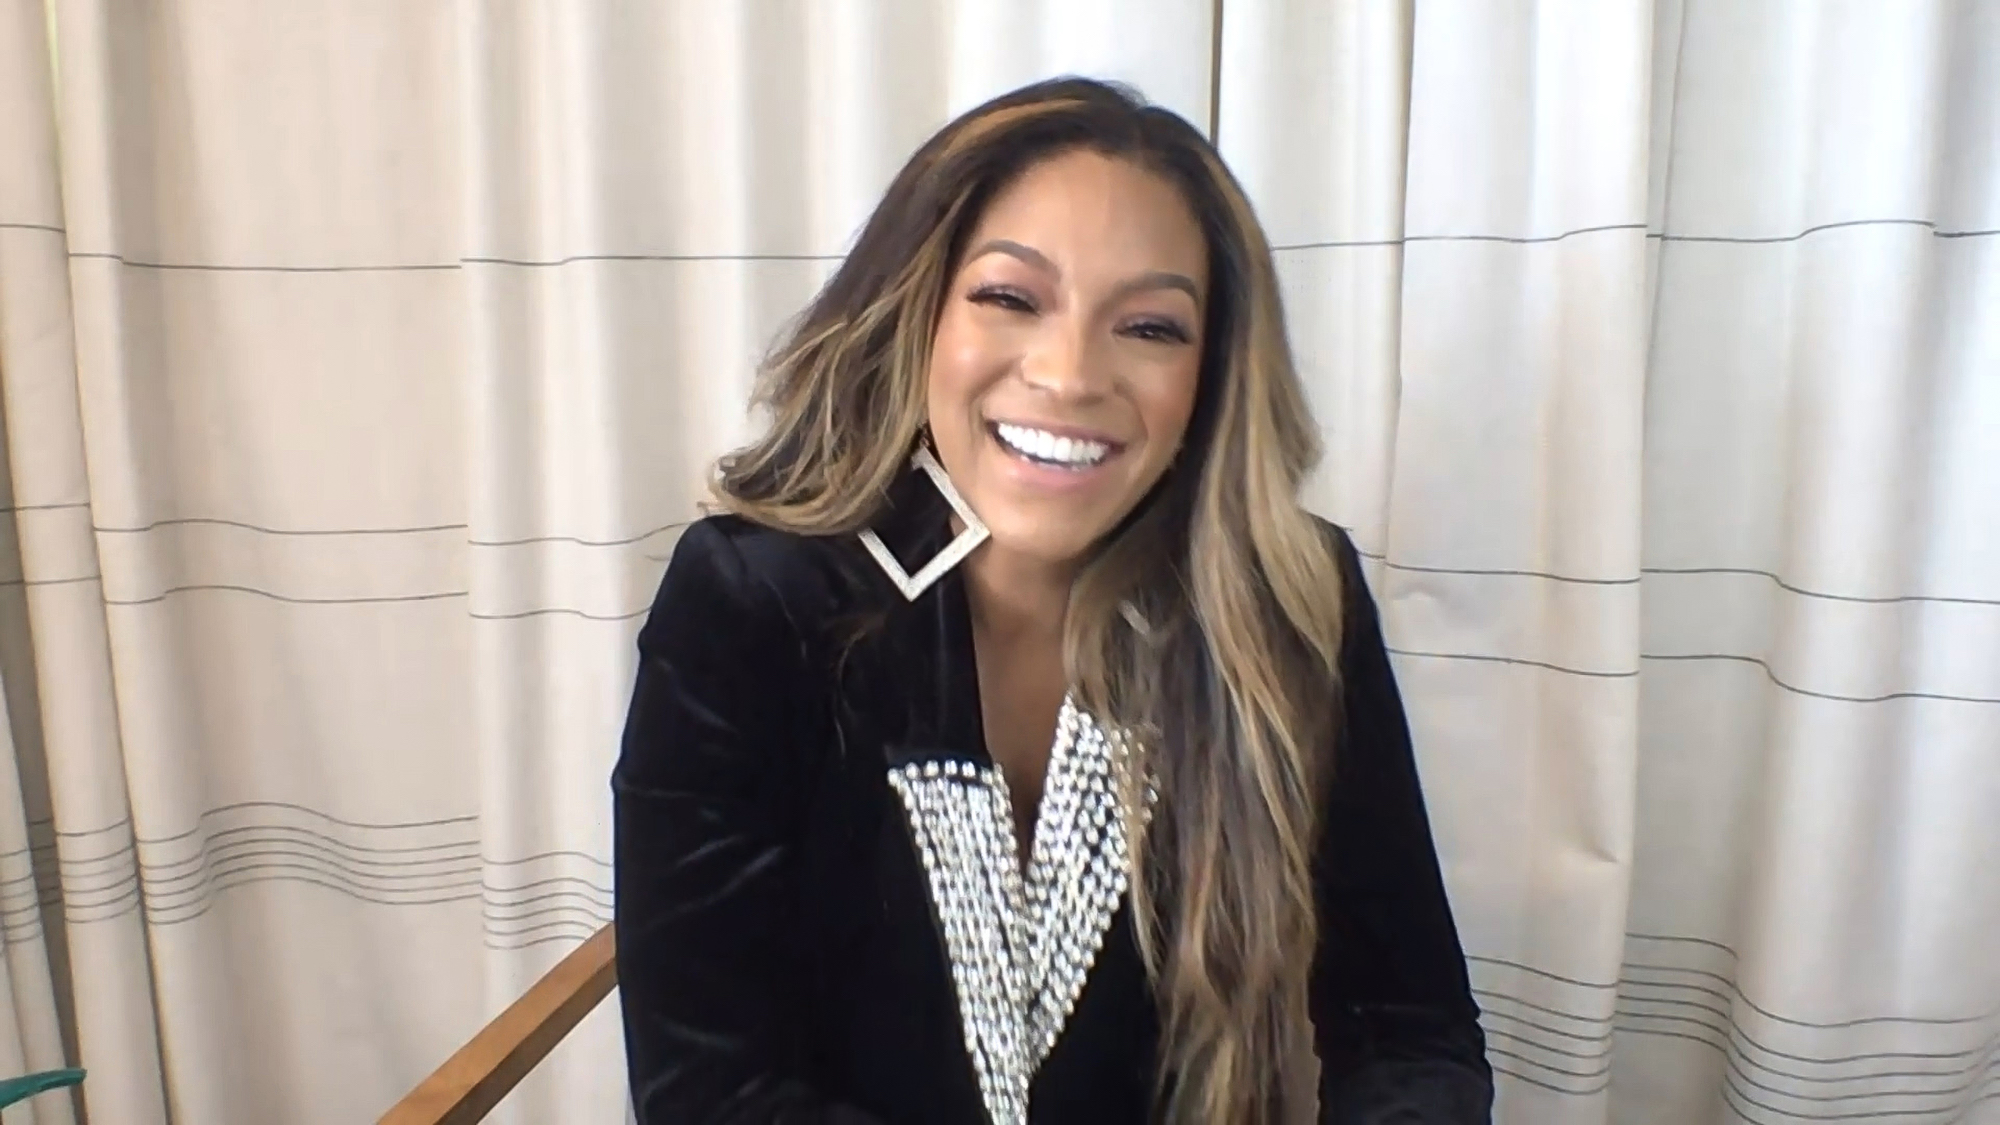 Drew Sidora laughing in front of a white curtain